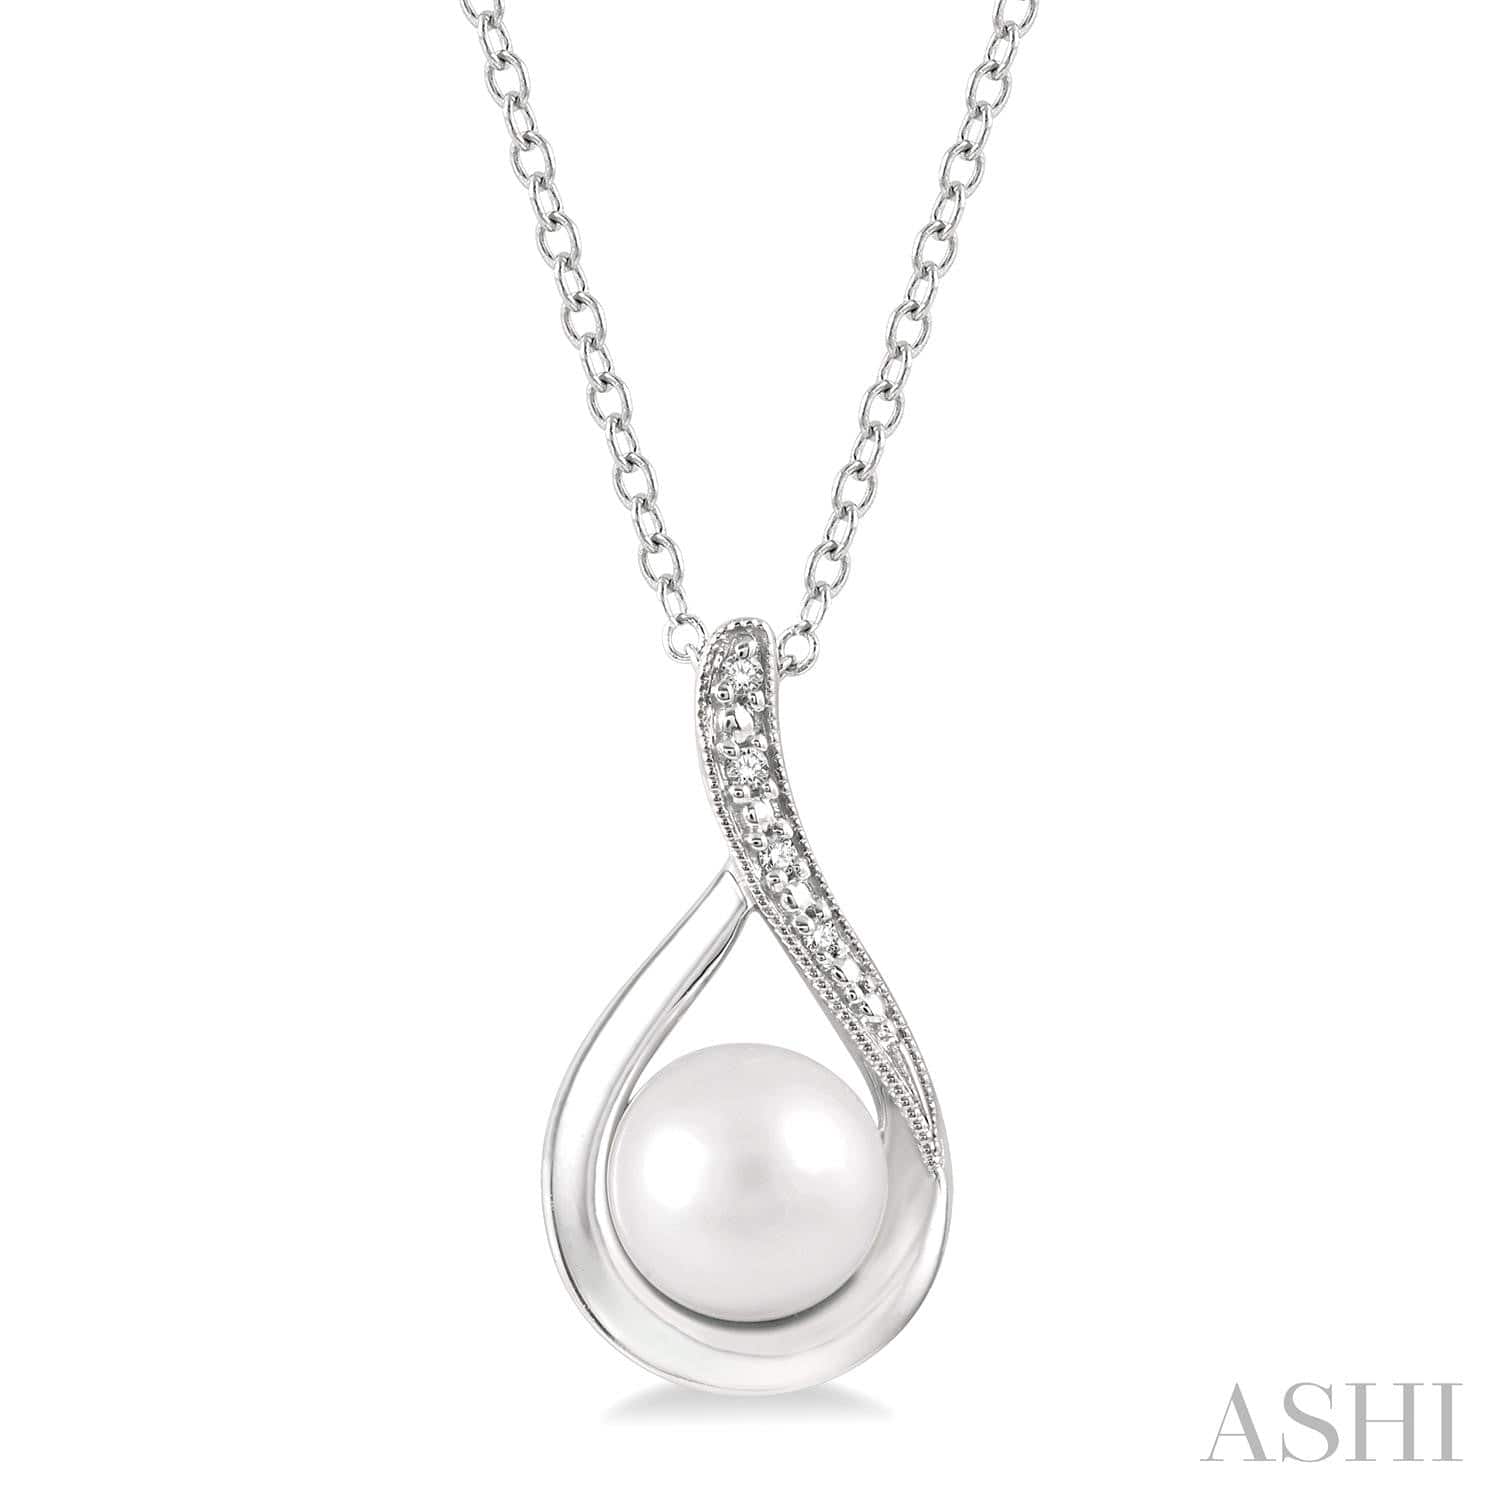 Golden Real Pearl Necklace with Pendant - Pearl Jewelry - Apearl